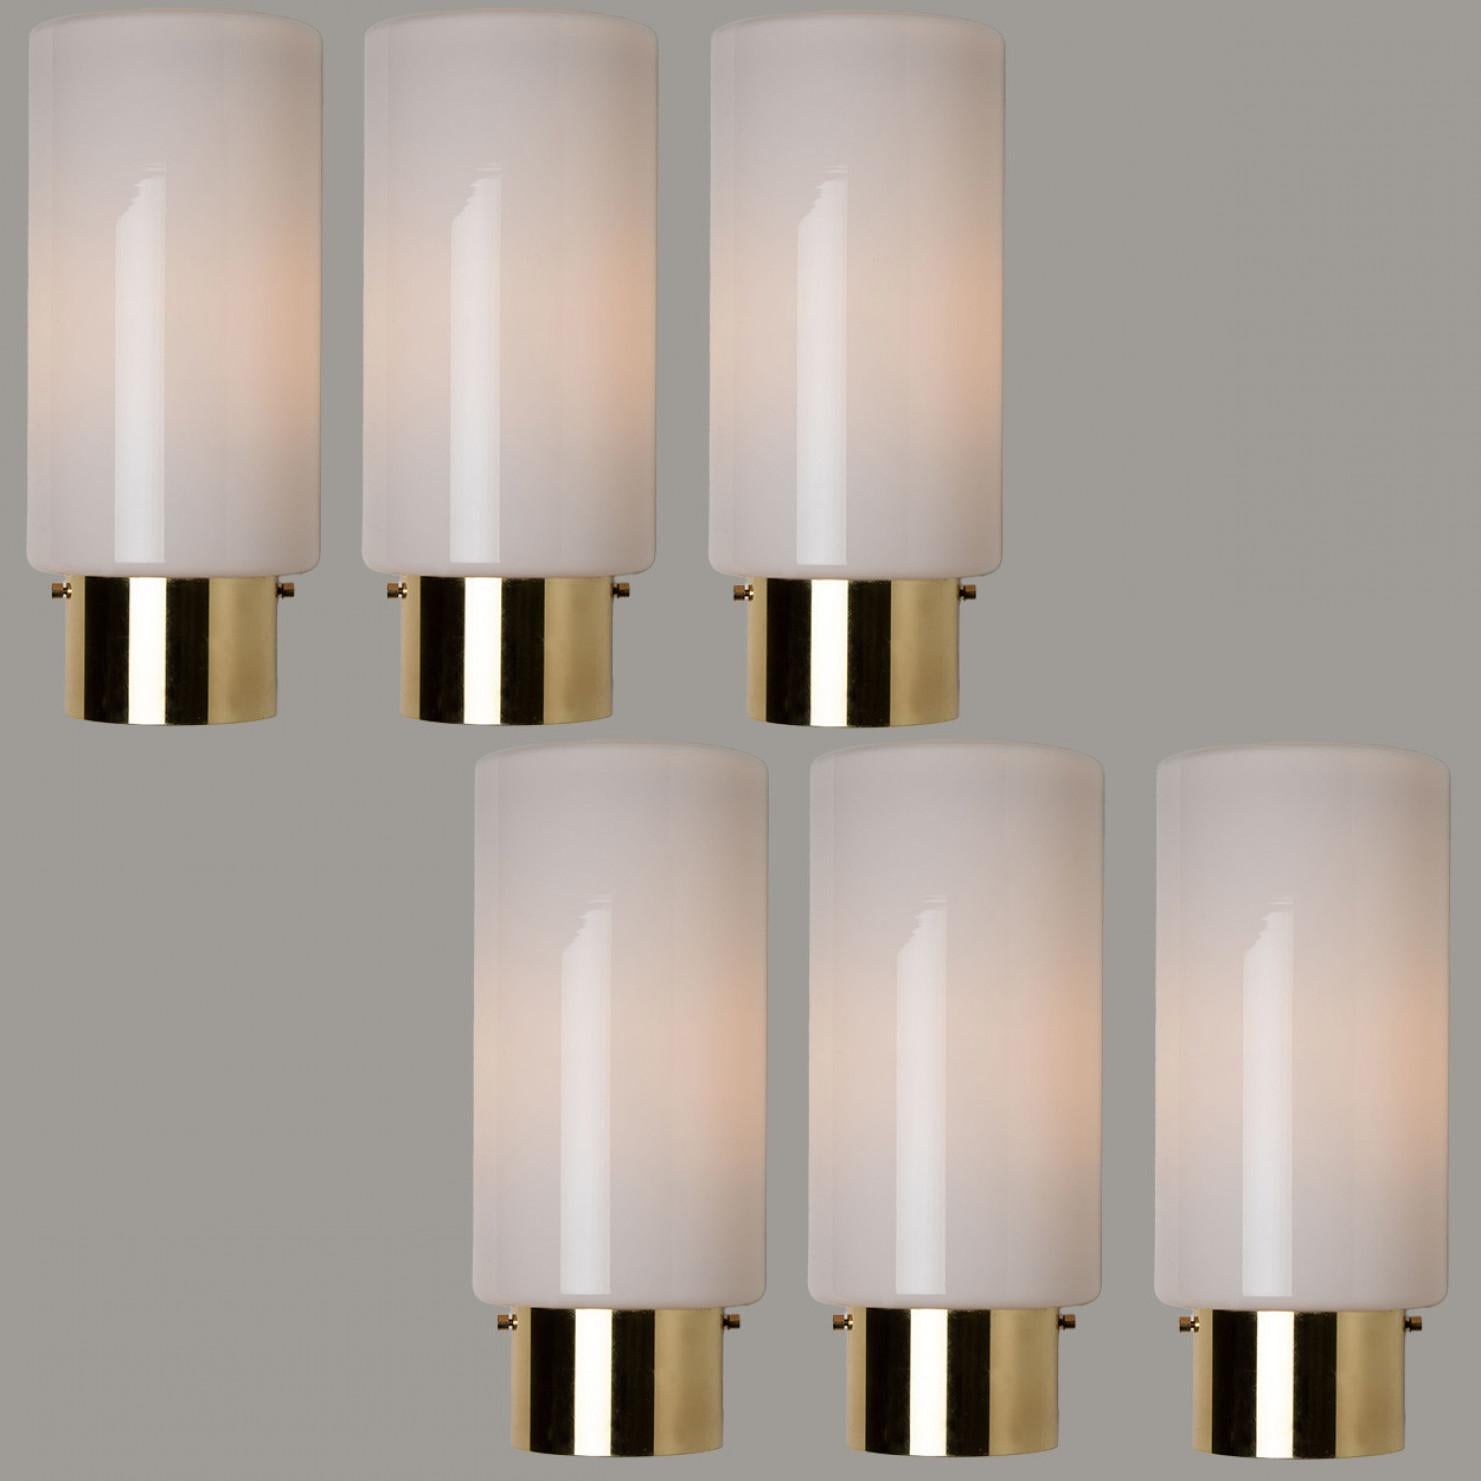 Heavy quality glass lamps with brass base. Beautiful white, opaque glass. Manufactured by the company Glasshütte Limburg, in Germany, Europe around 1970. This wall lights give a warm light that suits any space.

Please notice the price is for 1